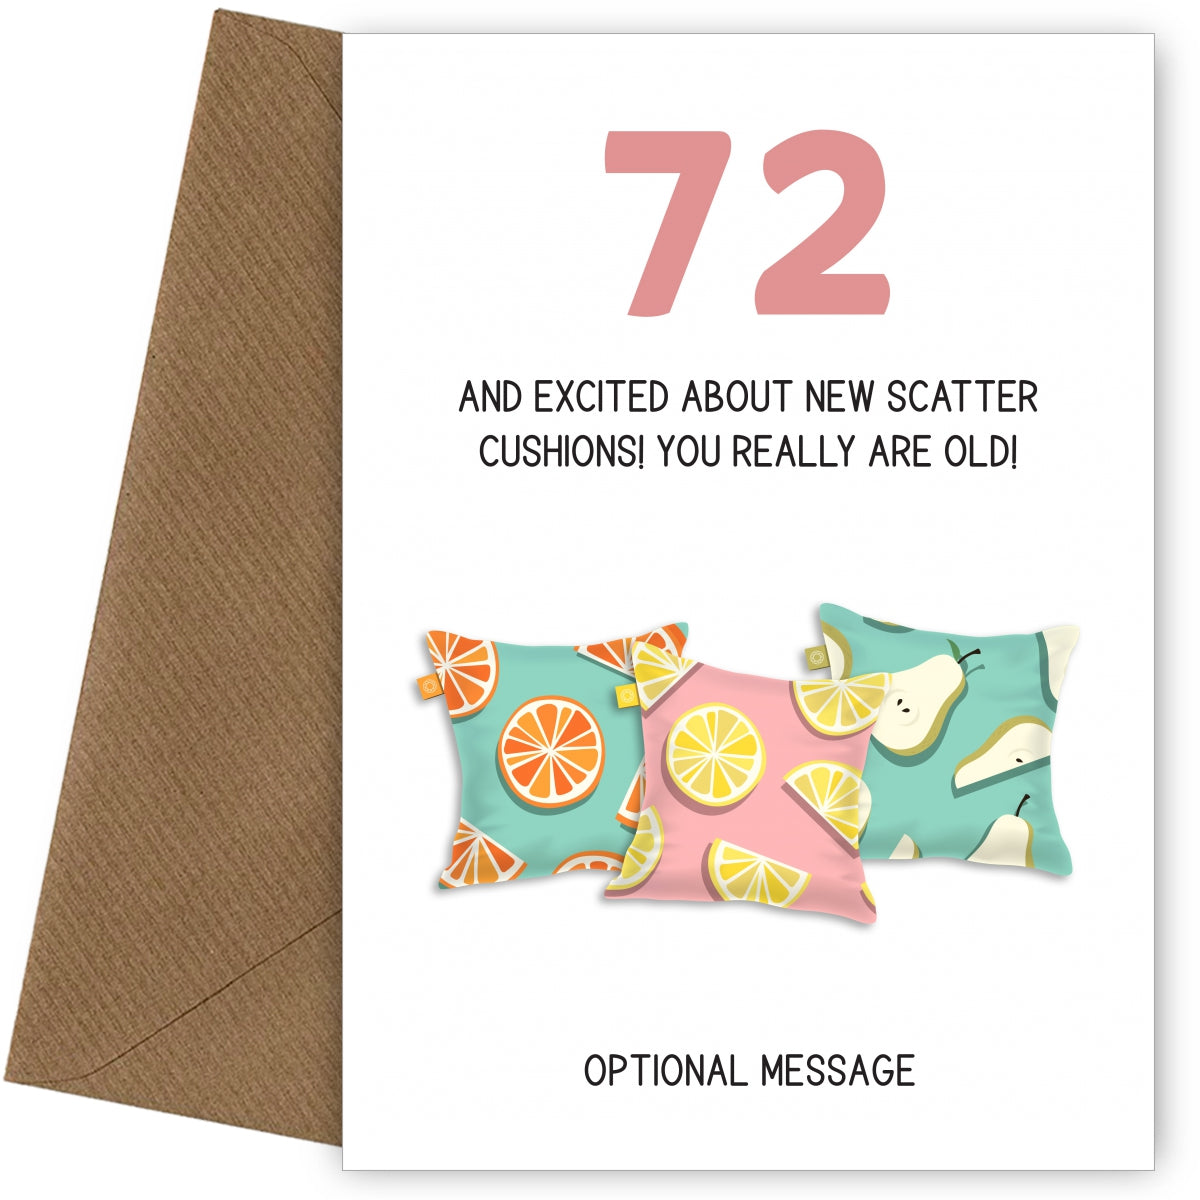 Happy 72nd Birthday Card - Excited About Scatter Cushions!